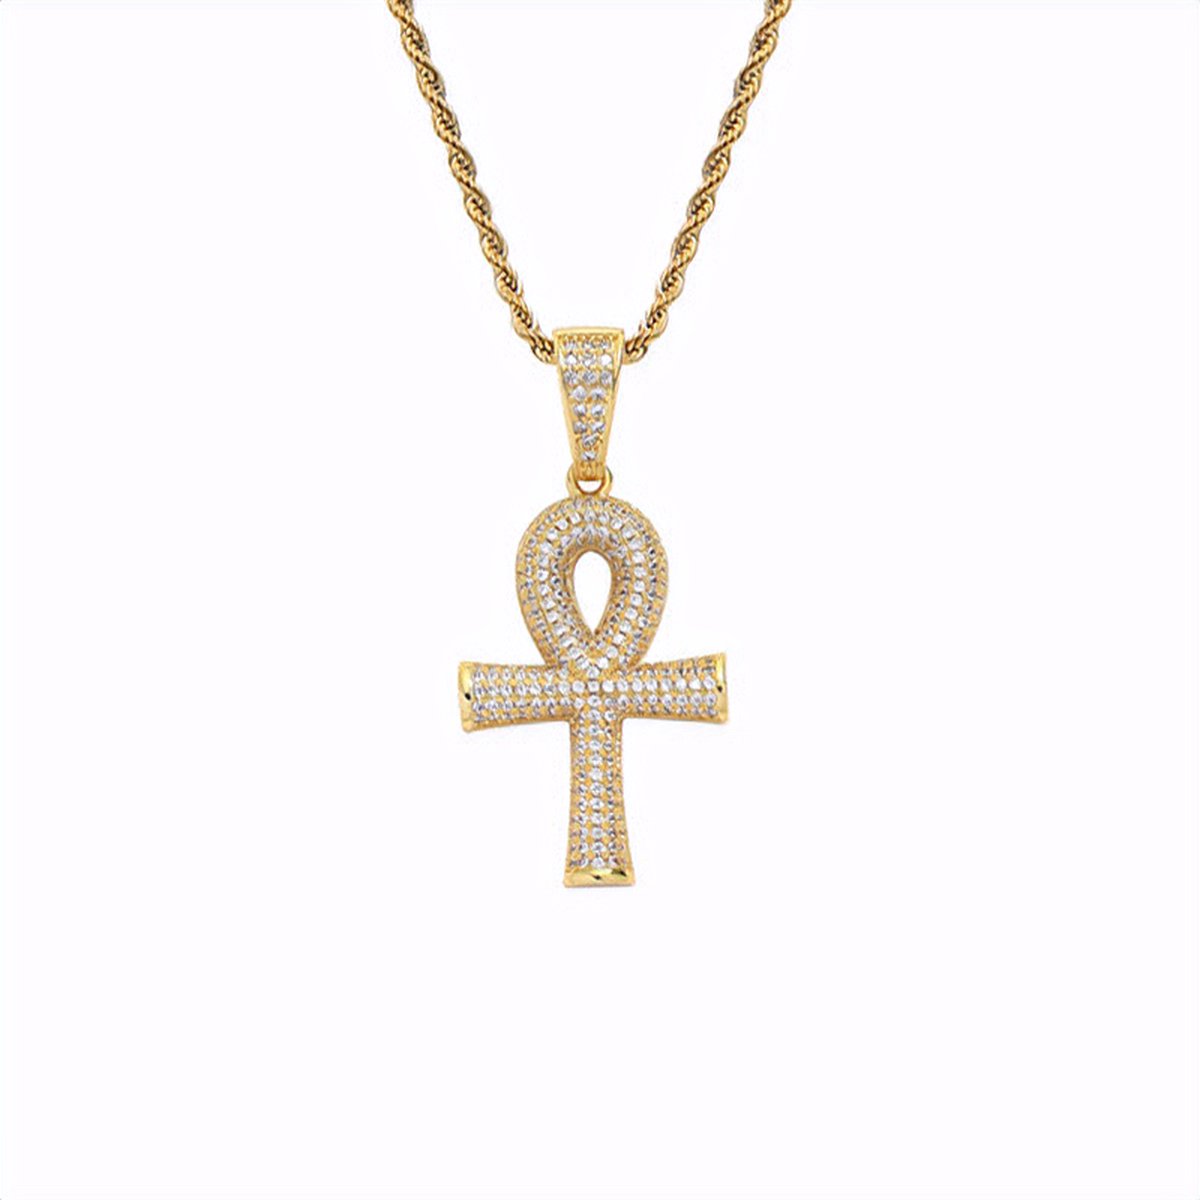 ICYBOY 18K Heren Ketting met Religieus Egyptisch Kruis / Ankh Verguld Goud [GOLD-PLATED] [ICED OUT] [24 INCH - 61CM] - Religious Egypt Ankh Cross Pendant Necklace